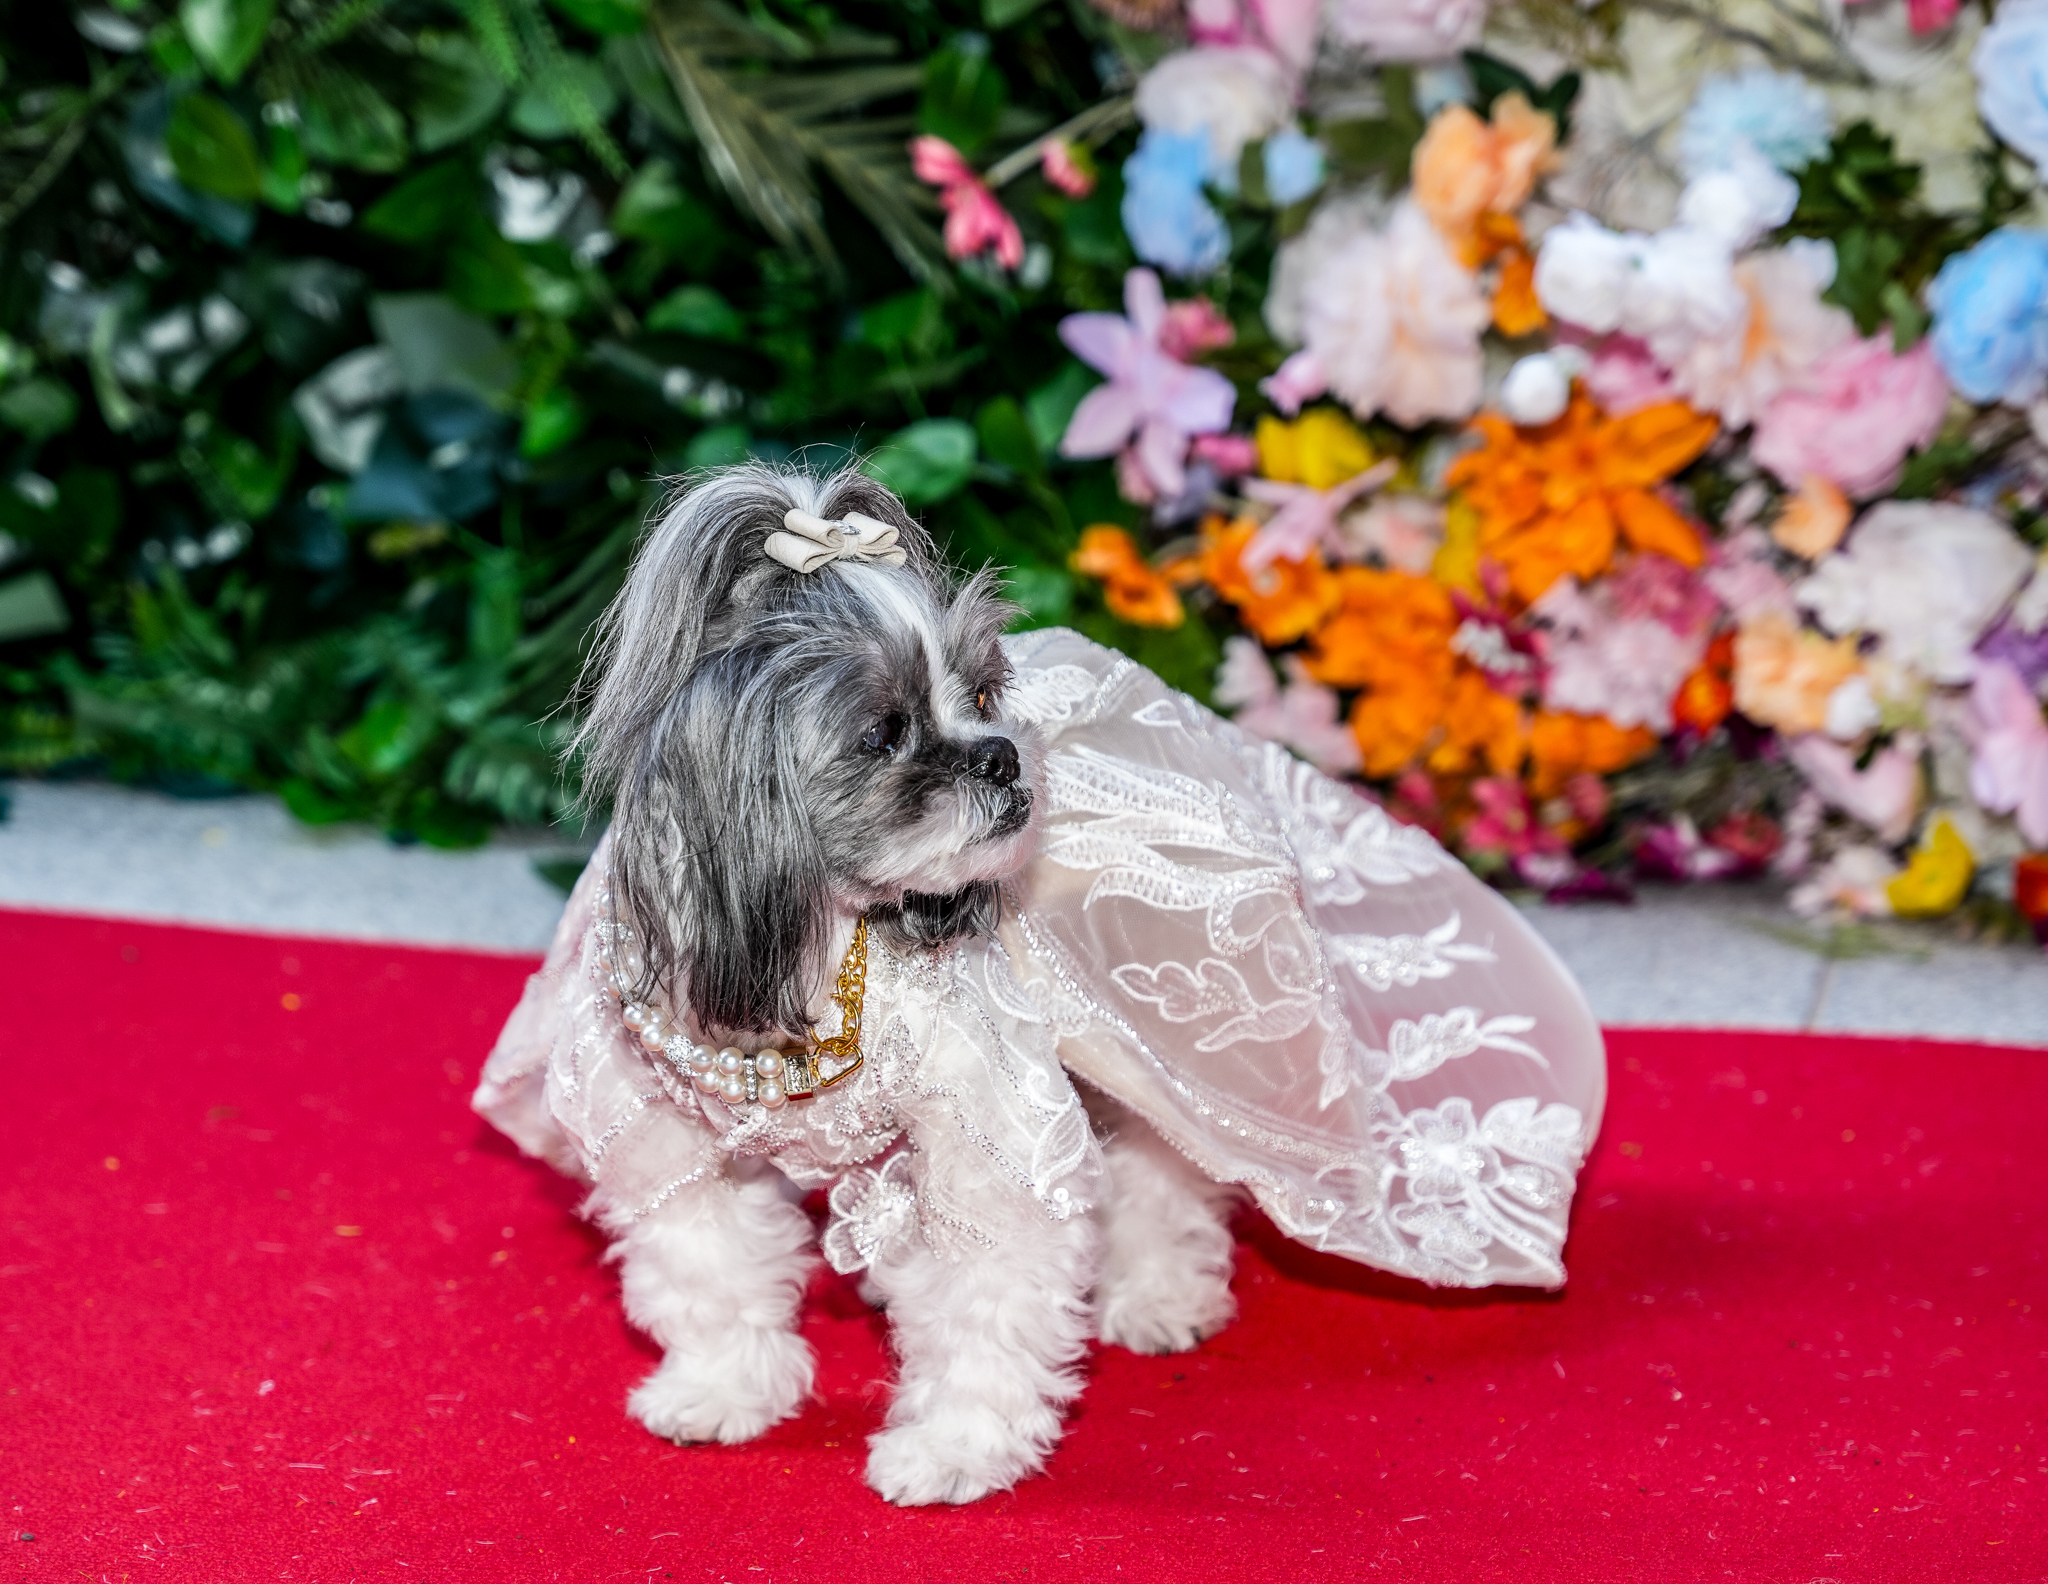 A dog in a white dress on a red carpet.